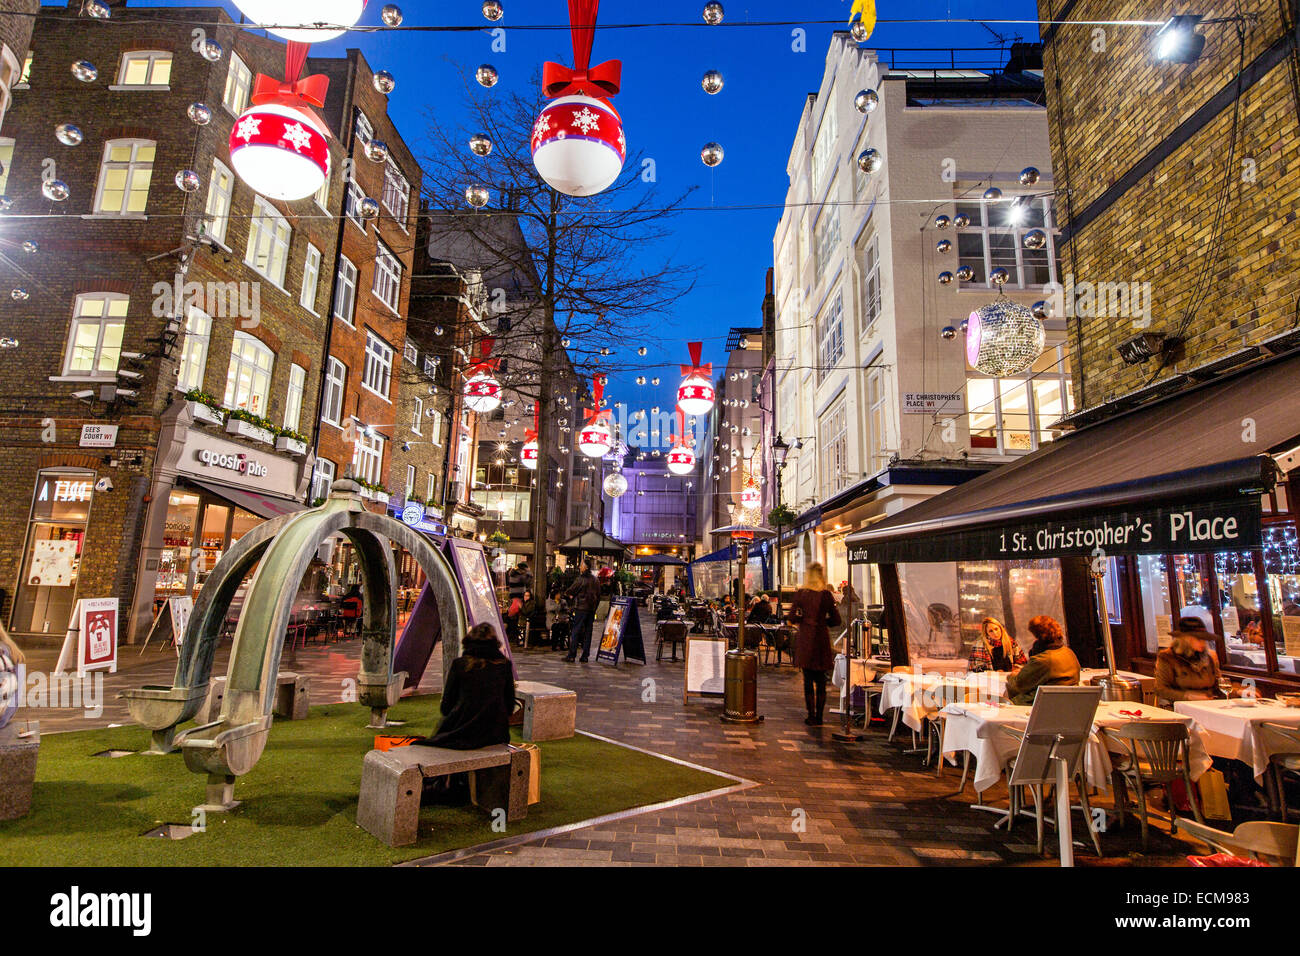 Christmas Decorations In St. Christophers Place At Night London UK Stock Photo